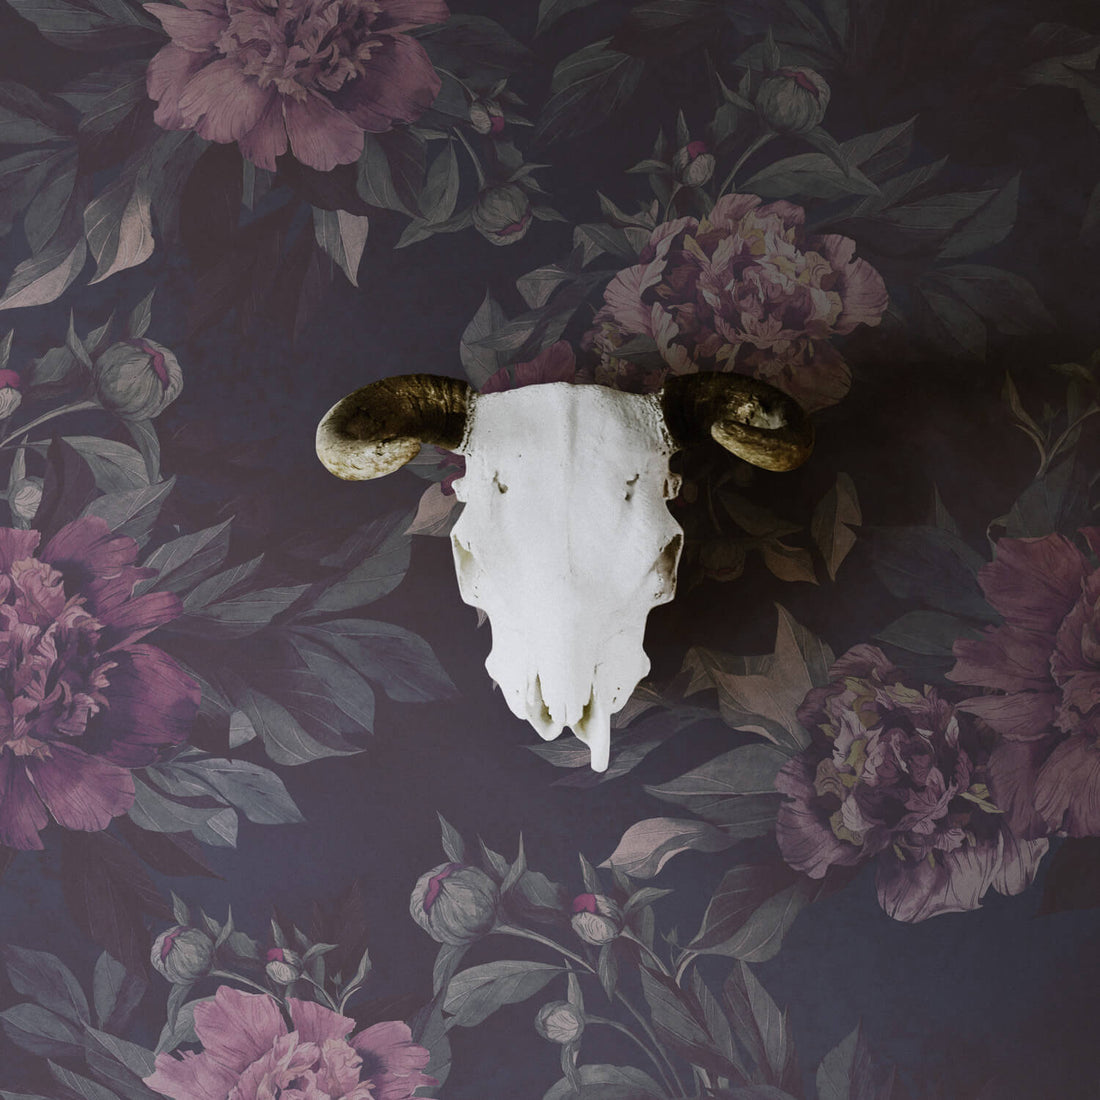 Dark floral design removable wallpaper for dramatic boho style interiors